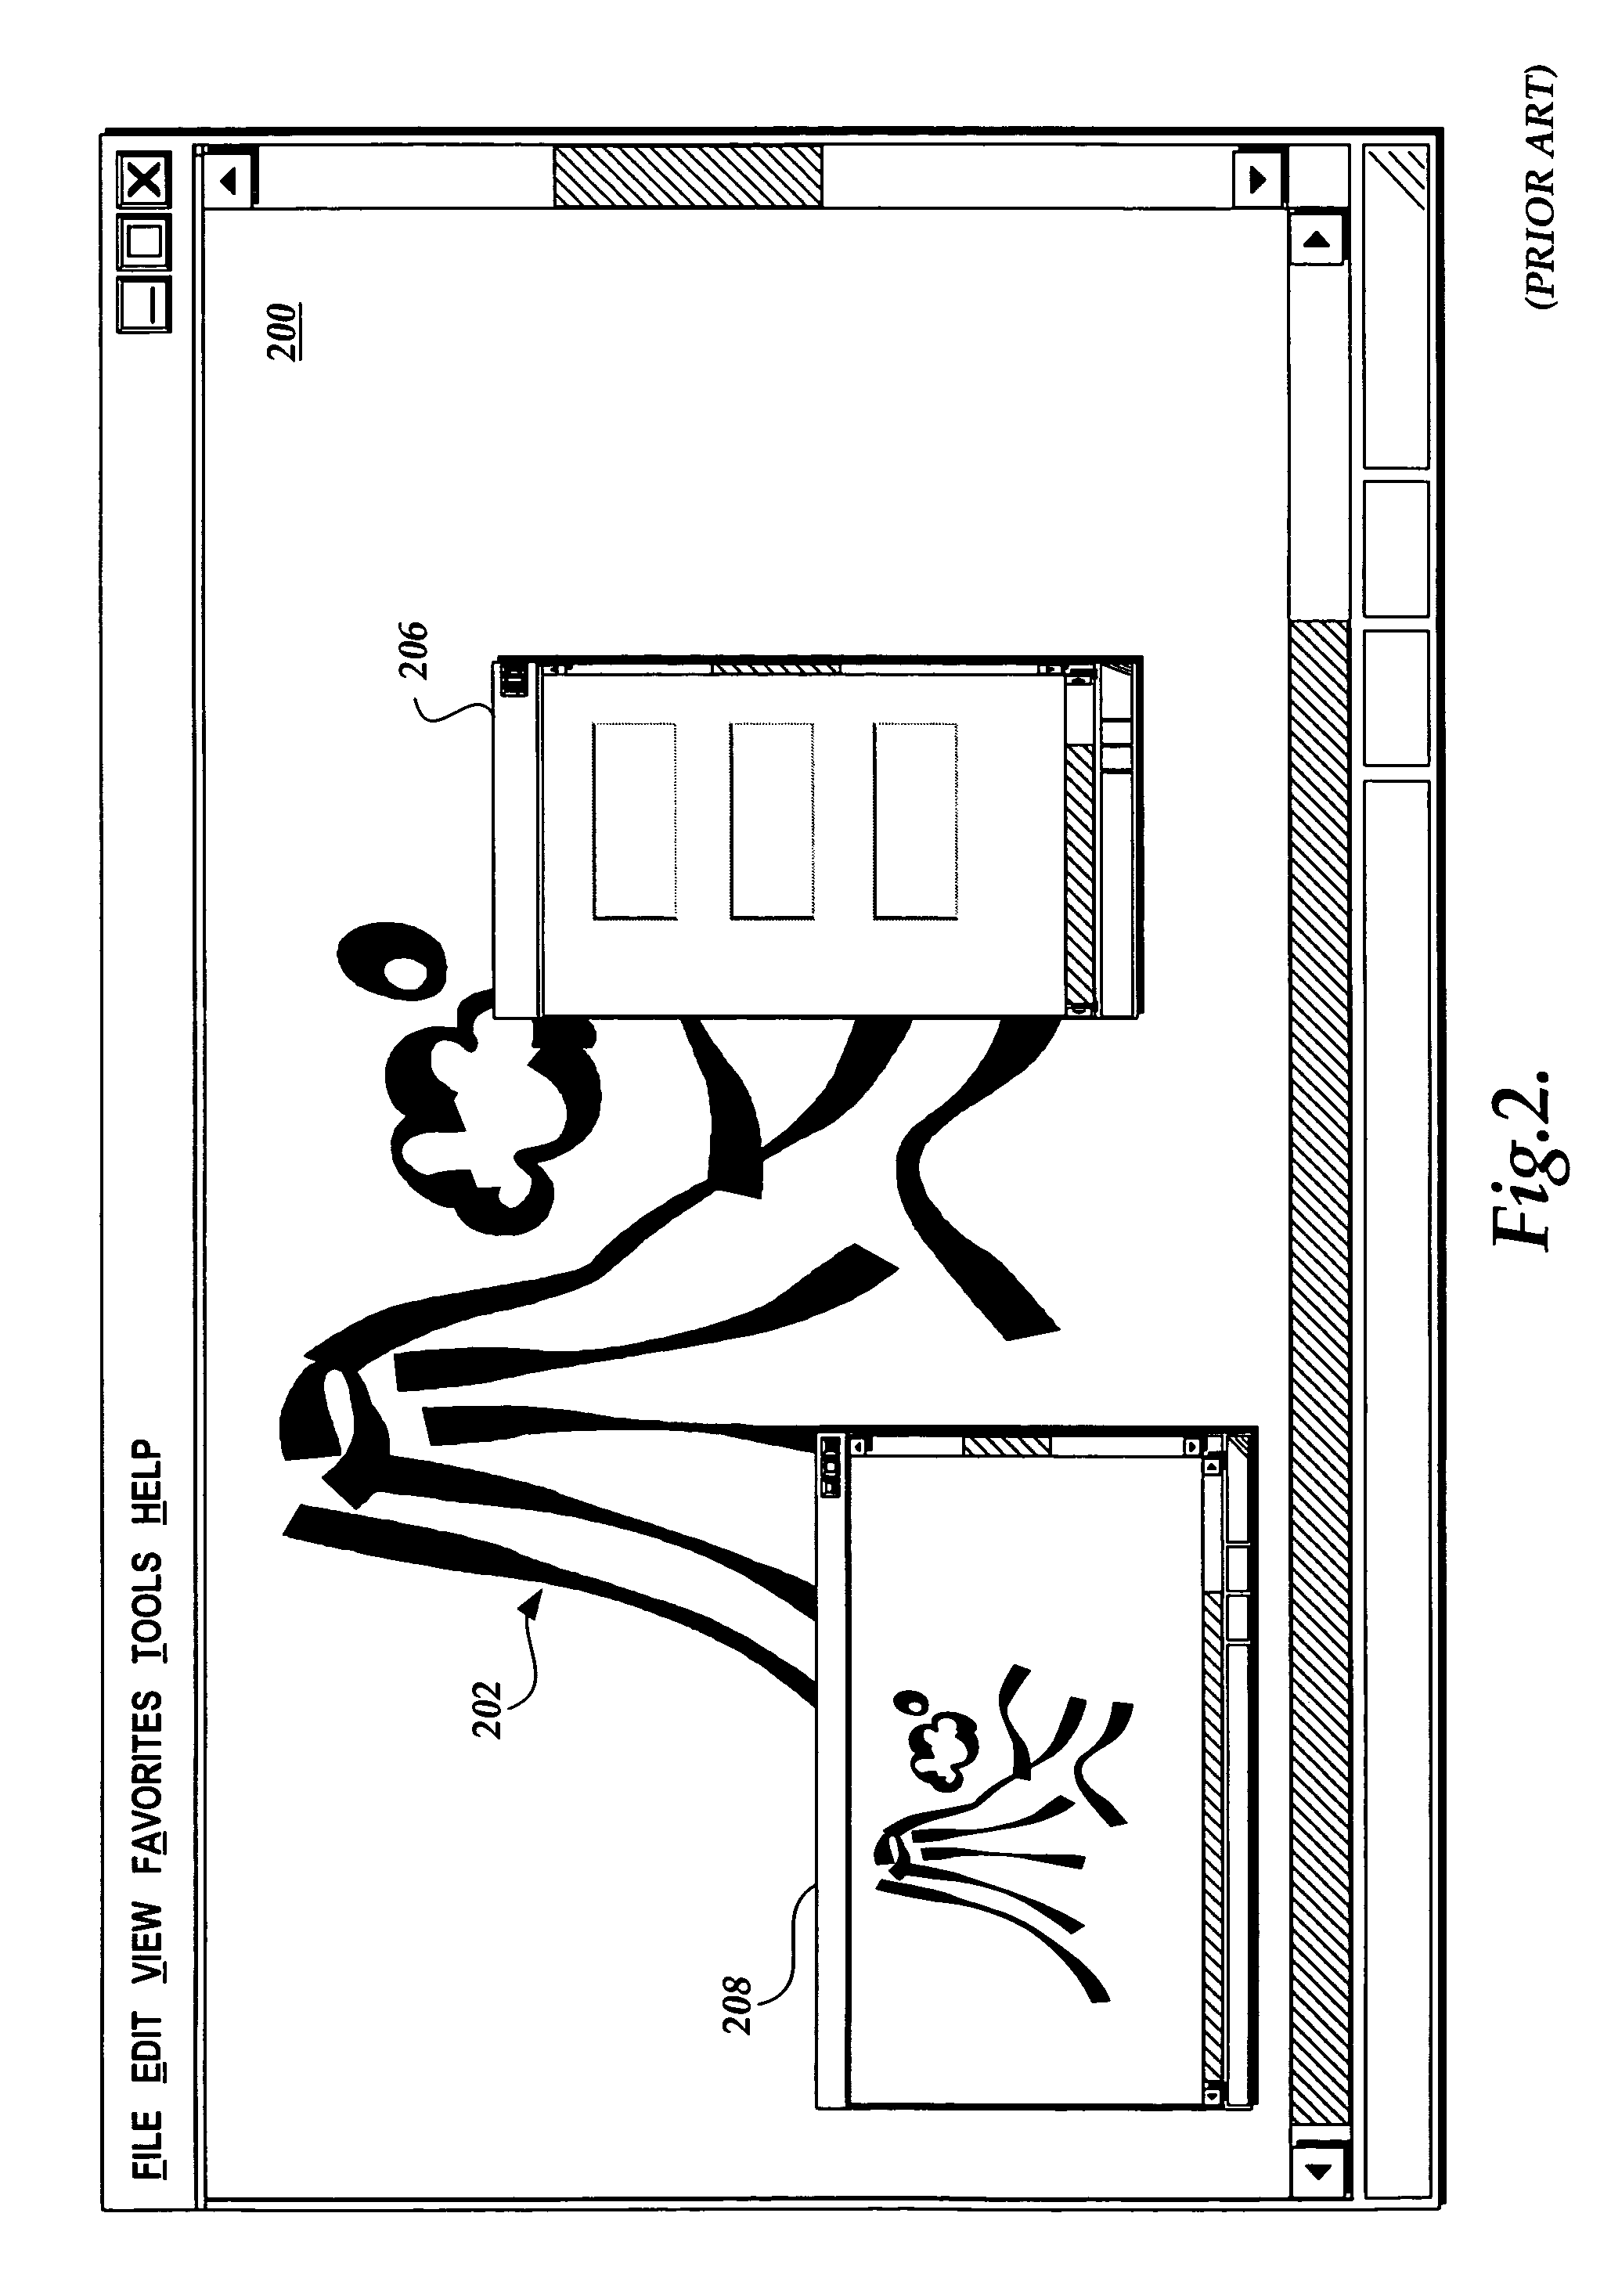 System and method for displaying images utilizing multi-blending